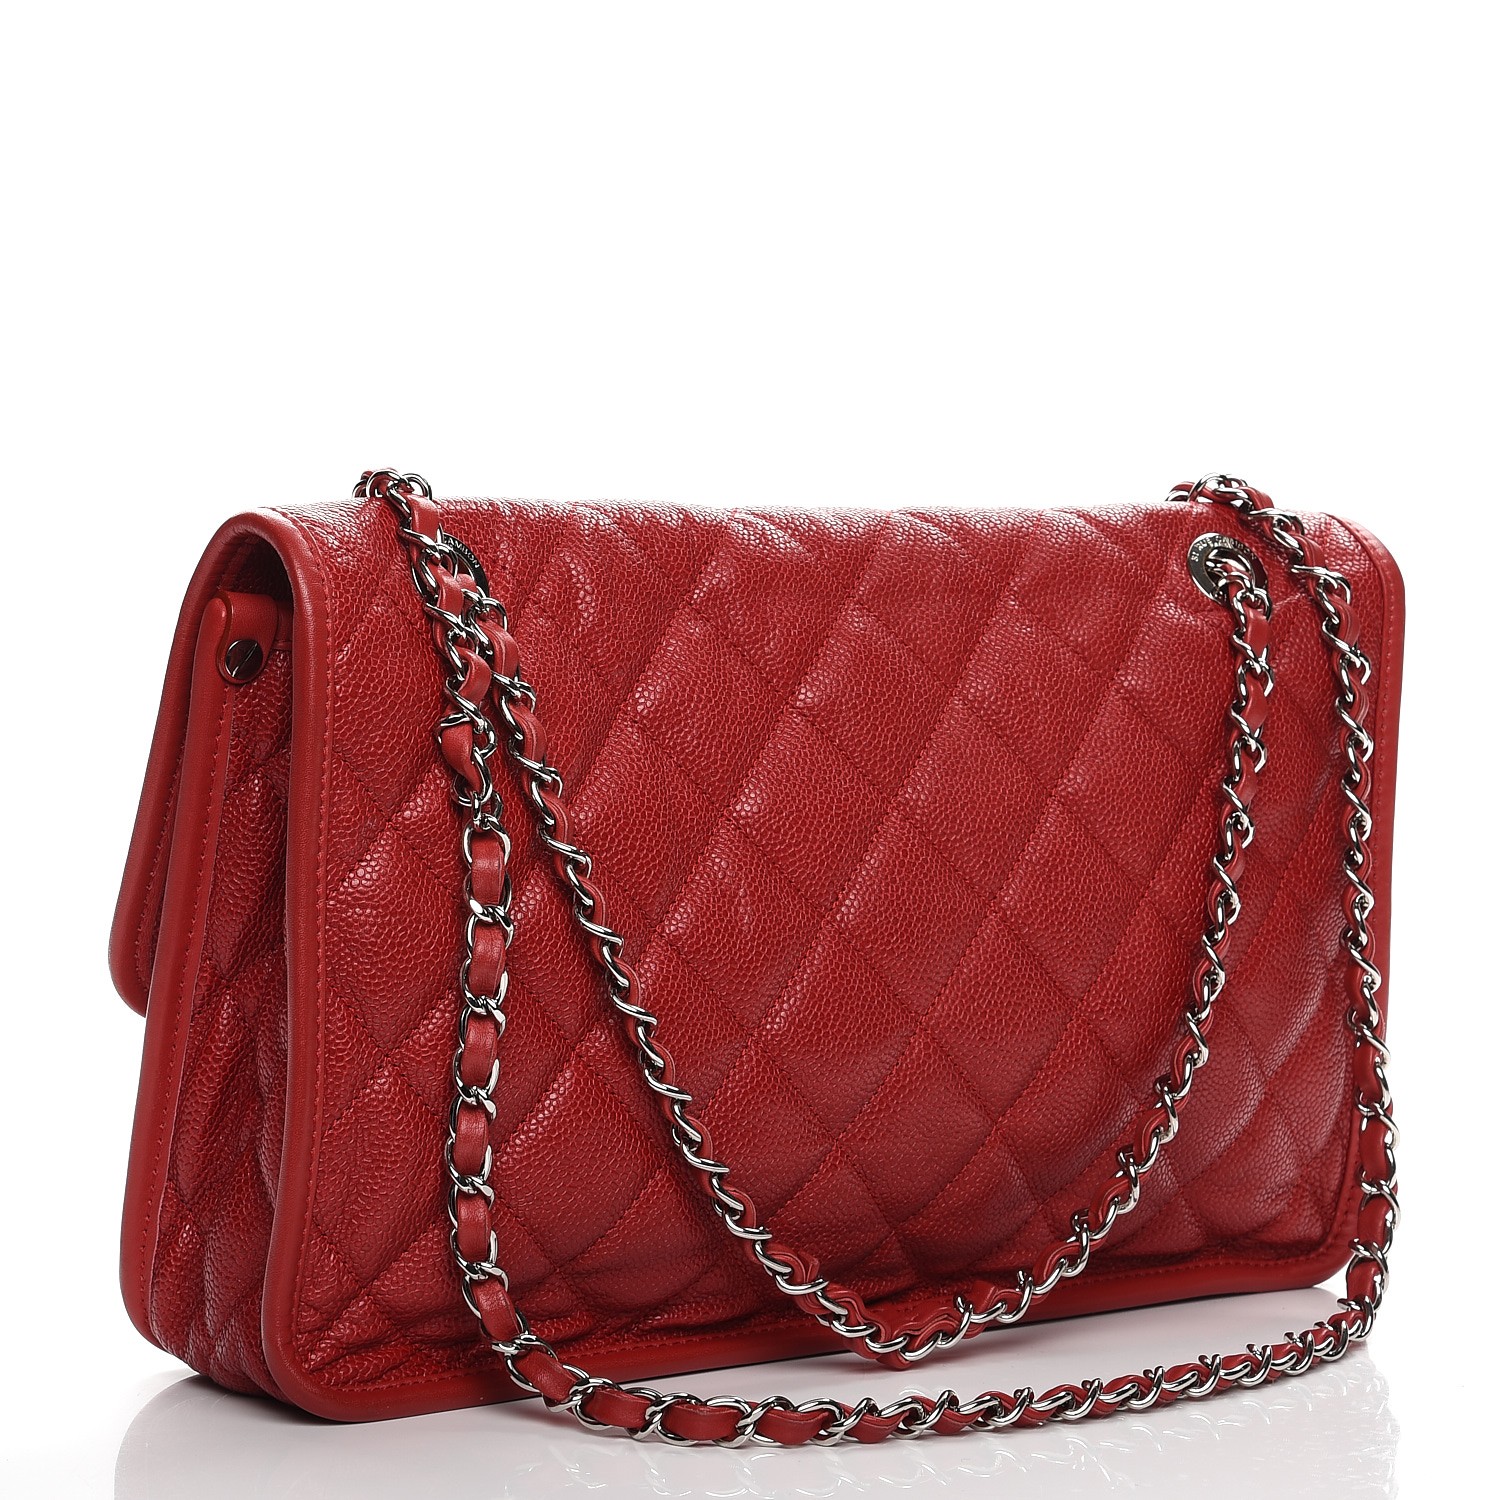 CHANEL Caviar Large French Riviera Flap Red 244152